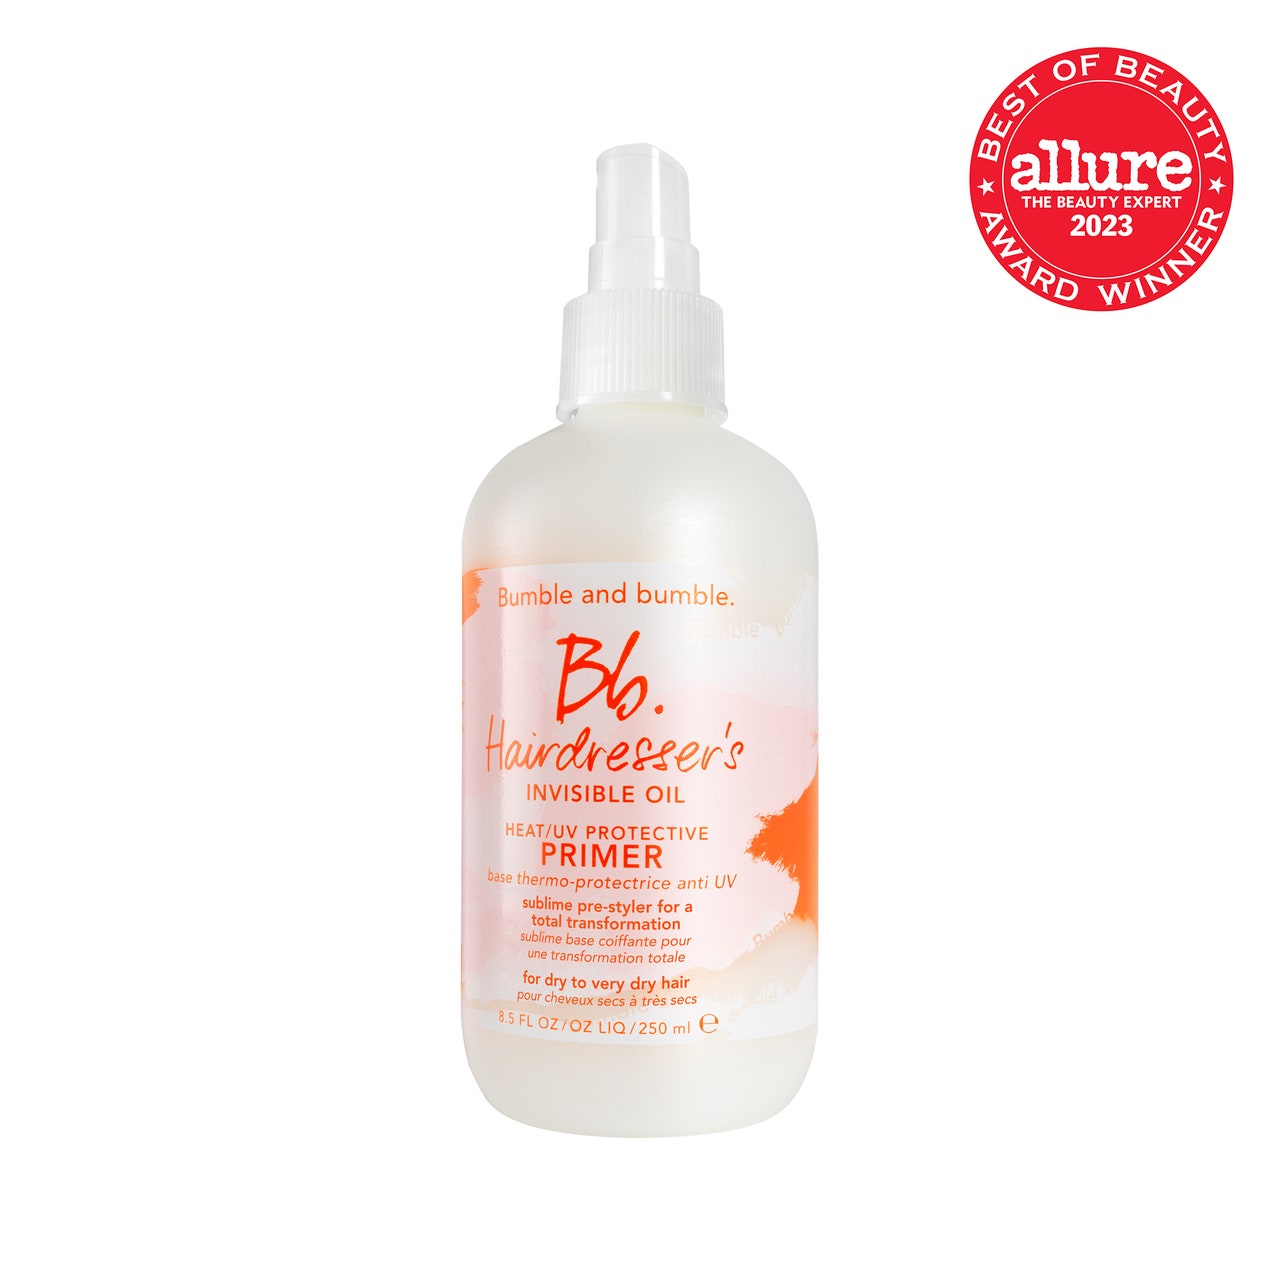 Bumble and Bumble Hairdresser’s Invisible Oil Heat/UV Protective Primer white spray bottle with orange and peach paint splatters on it on white background with red Allure BoB seal in the top right corner